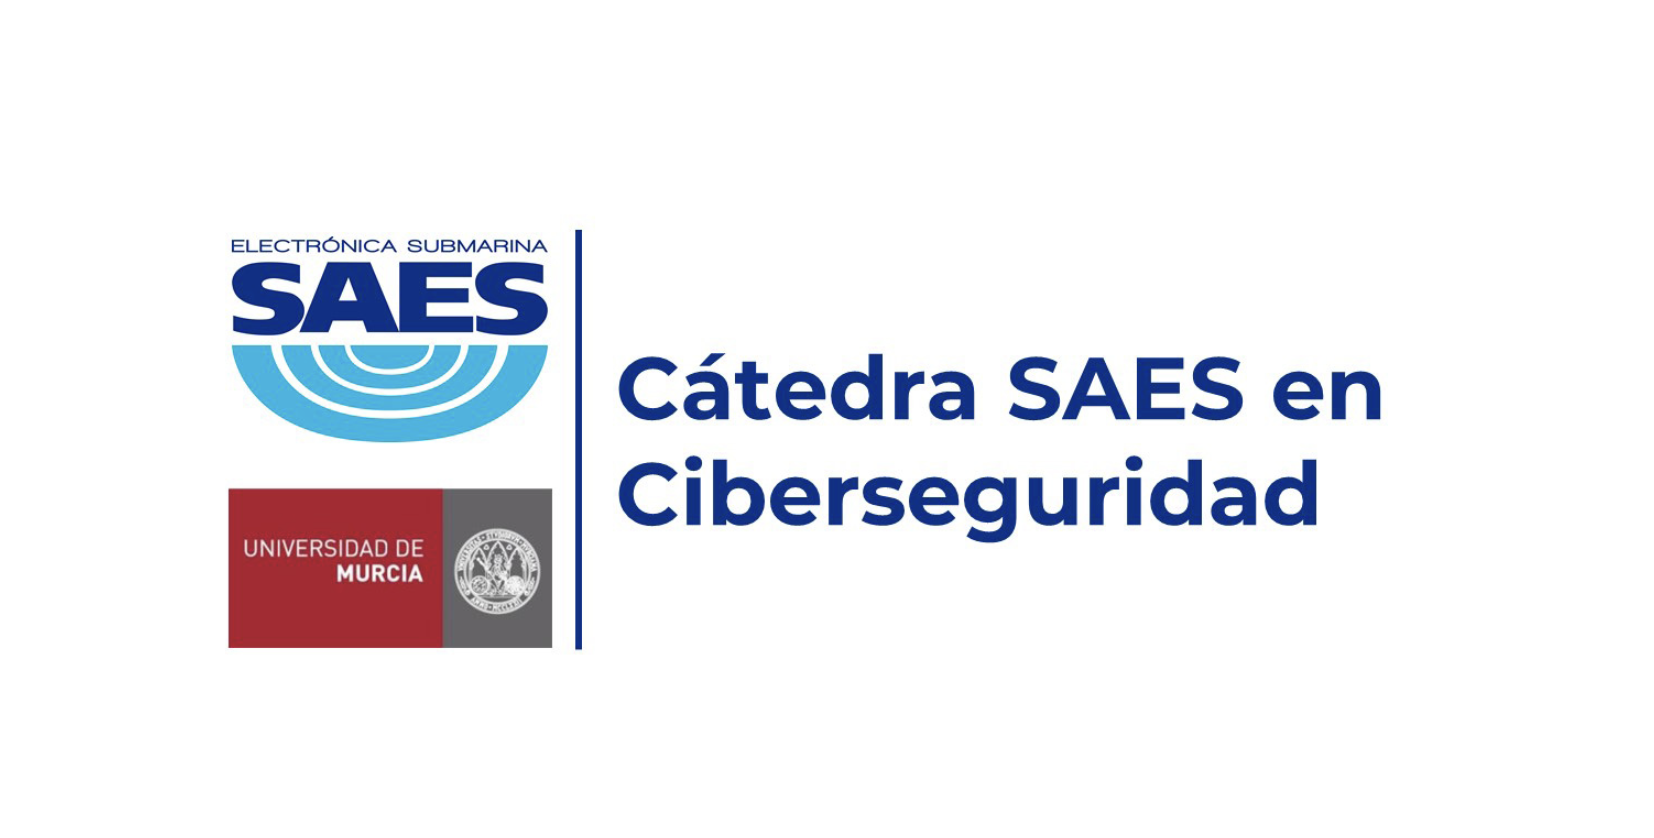 SAES Chair on Cybersecurity